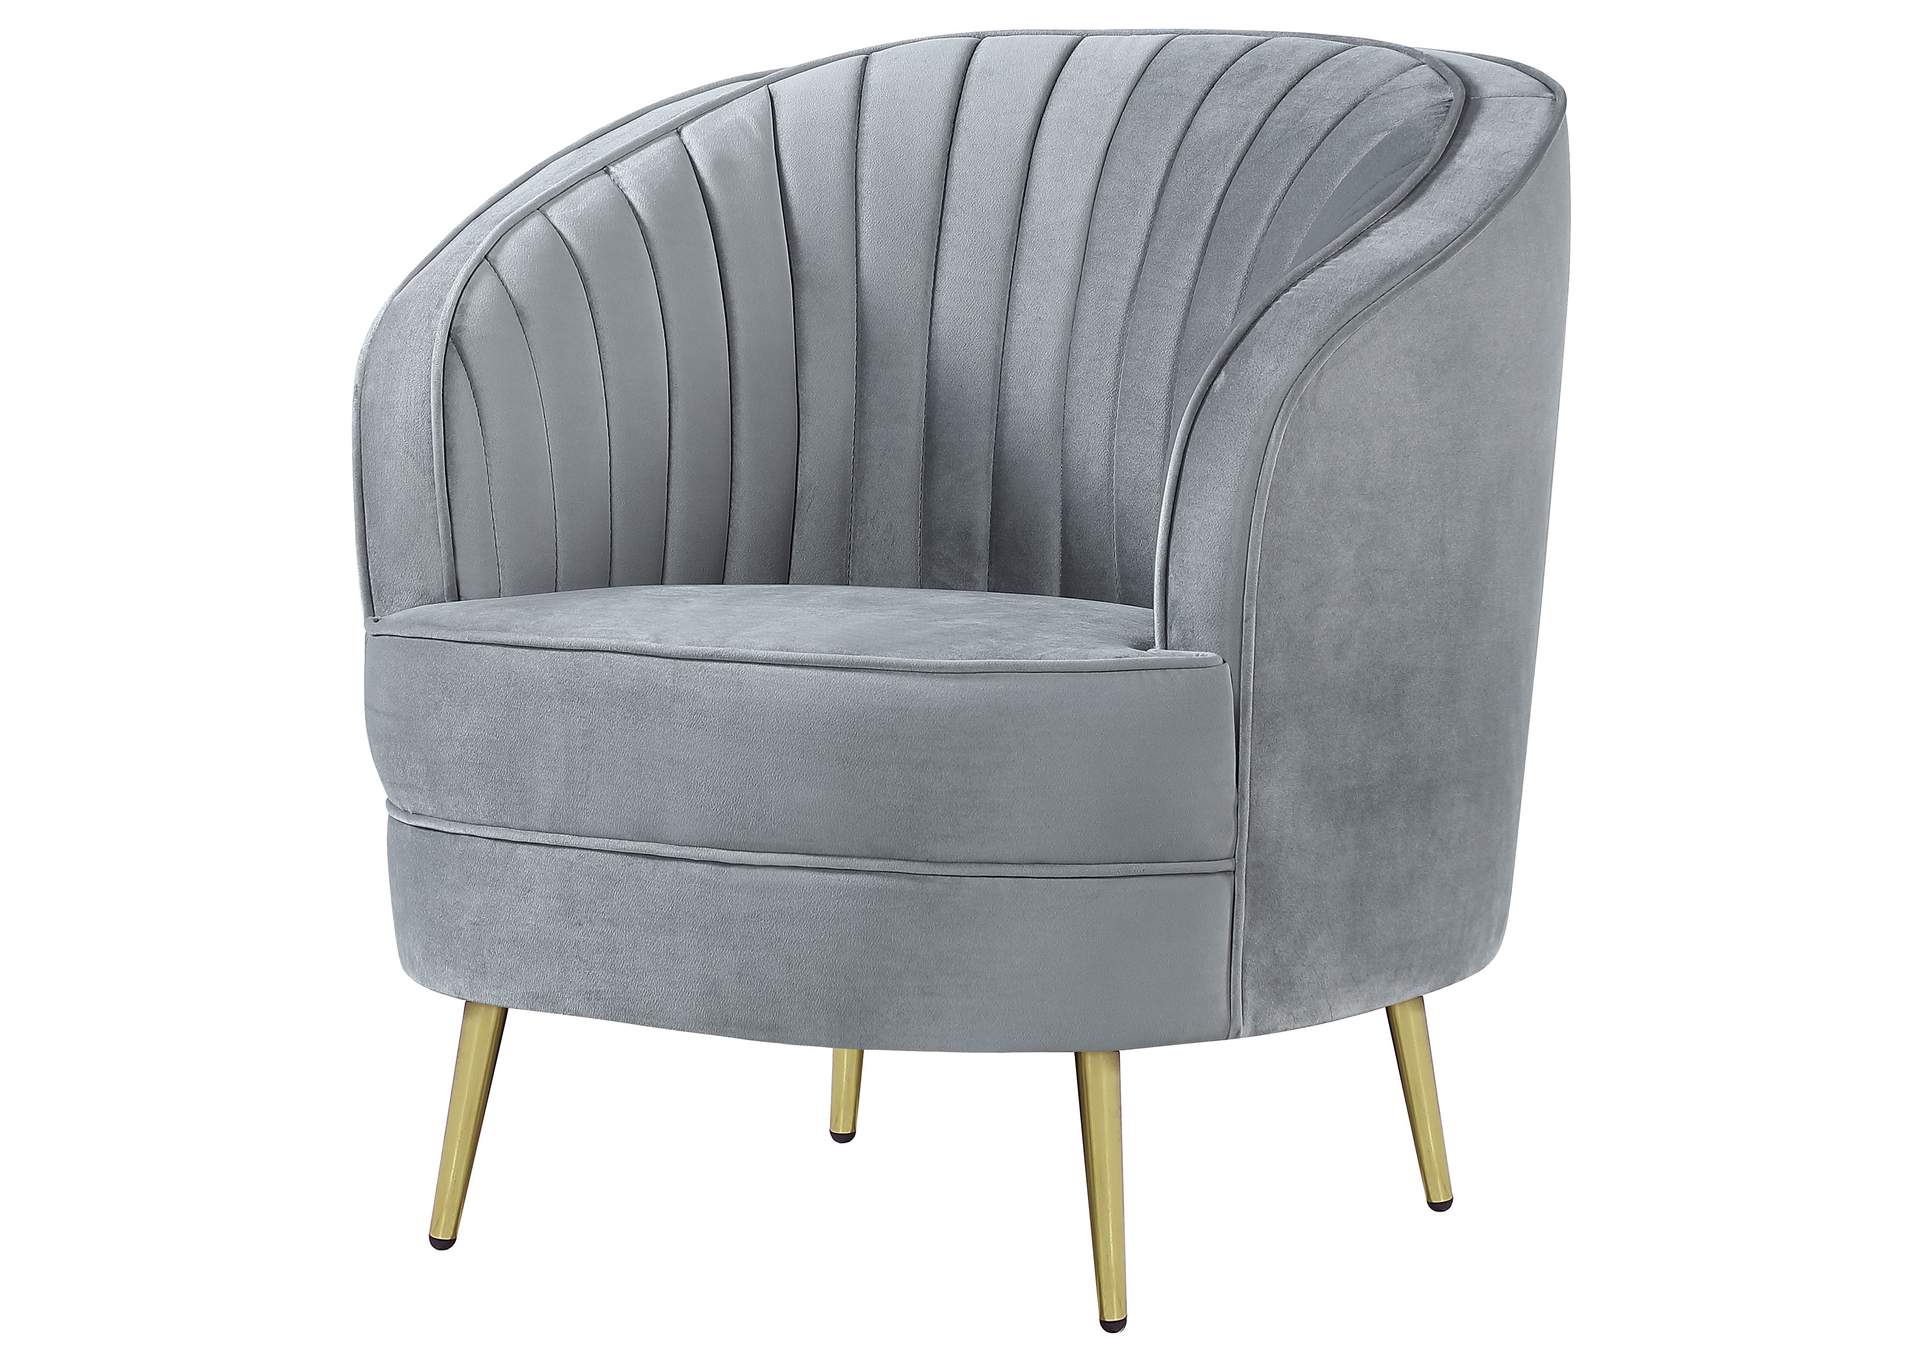 Sophia Upholstered Chair Grey and Gold,Coaster Furniture